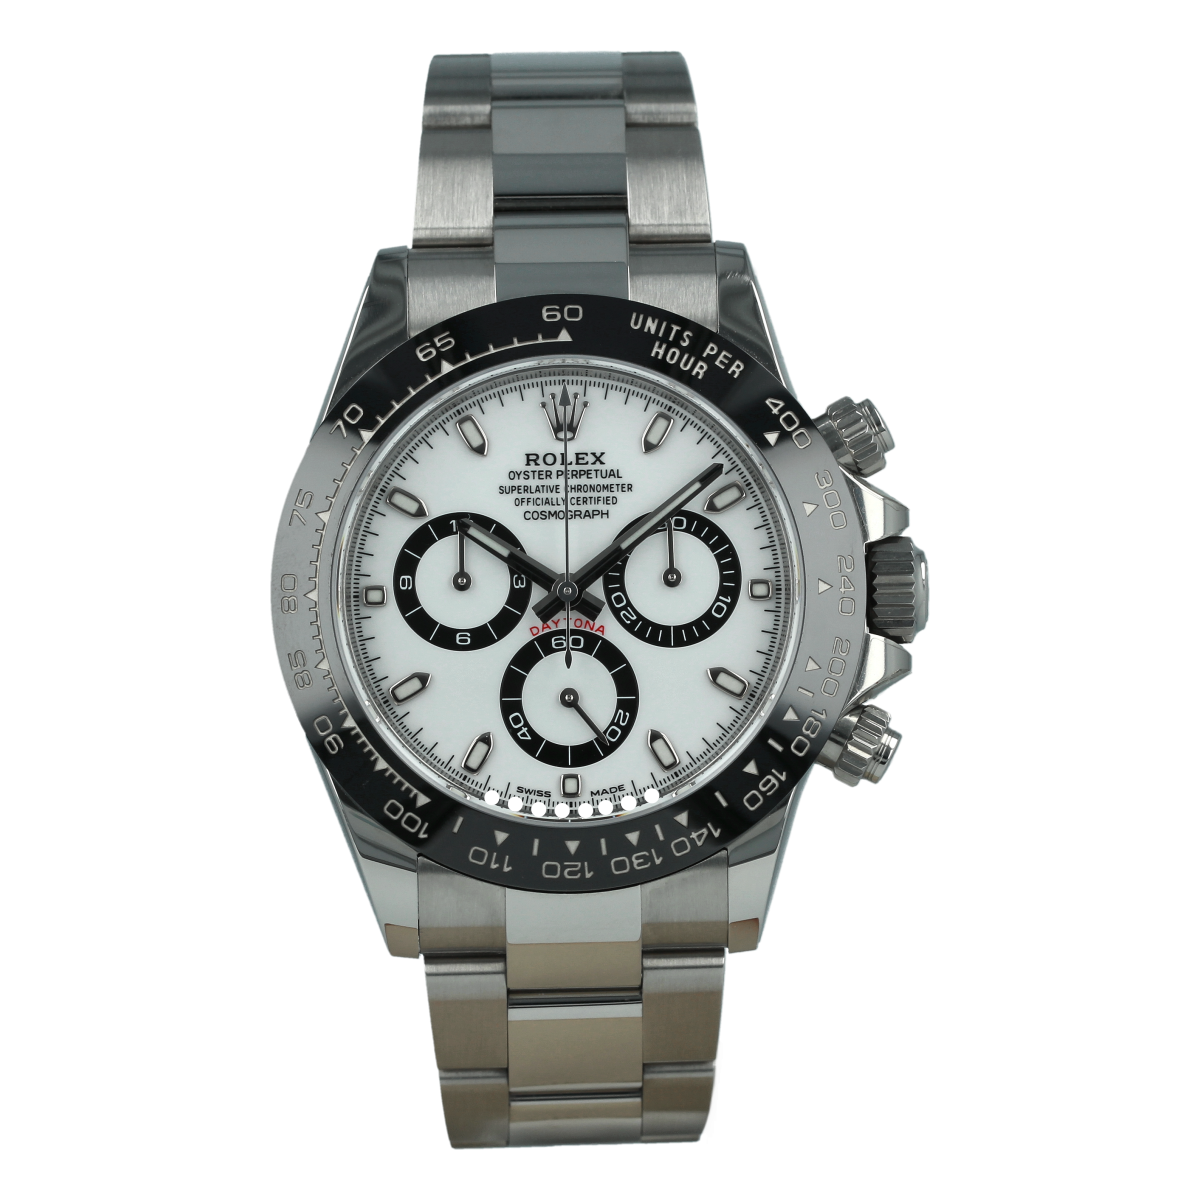 Rolex Cosmograph Daytona 116500LN White Dial *Like New* | Buy pre-owned ...